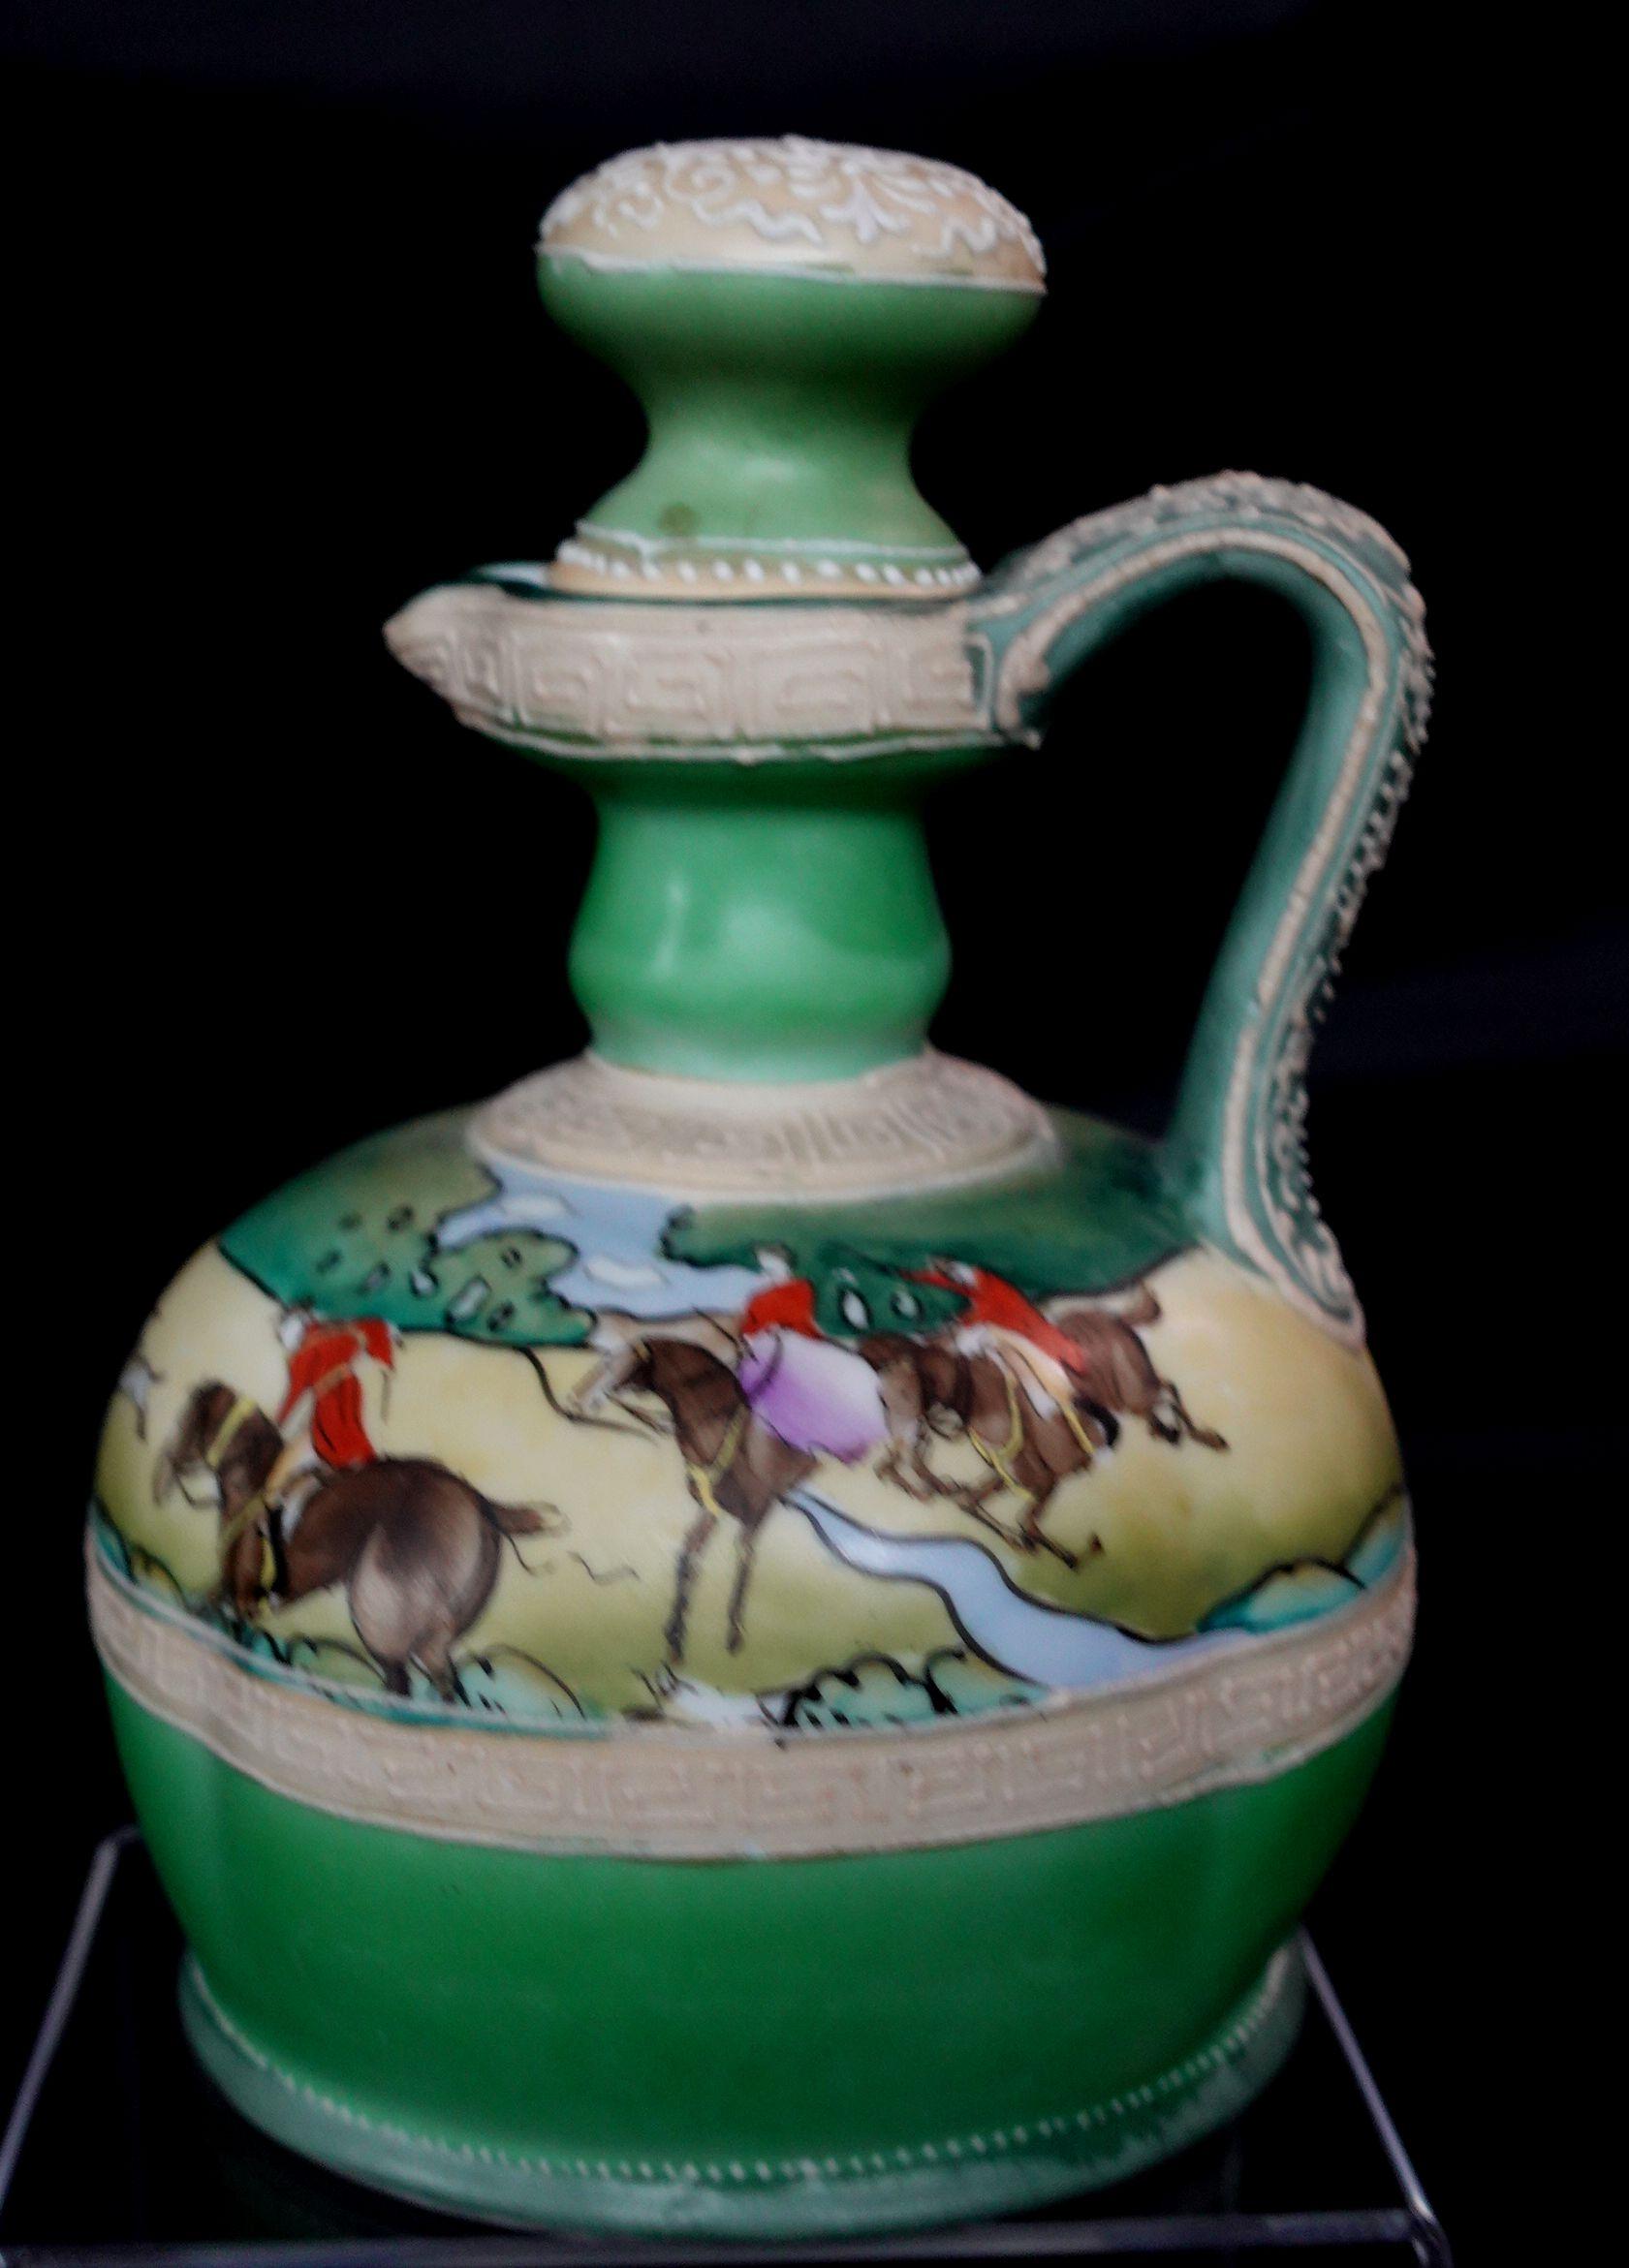 Antique 1900s nippon Moriage whiskey jugs with English Hunt Scene, hand-painted signed, and marked at the bottom.
   